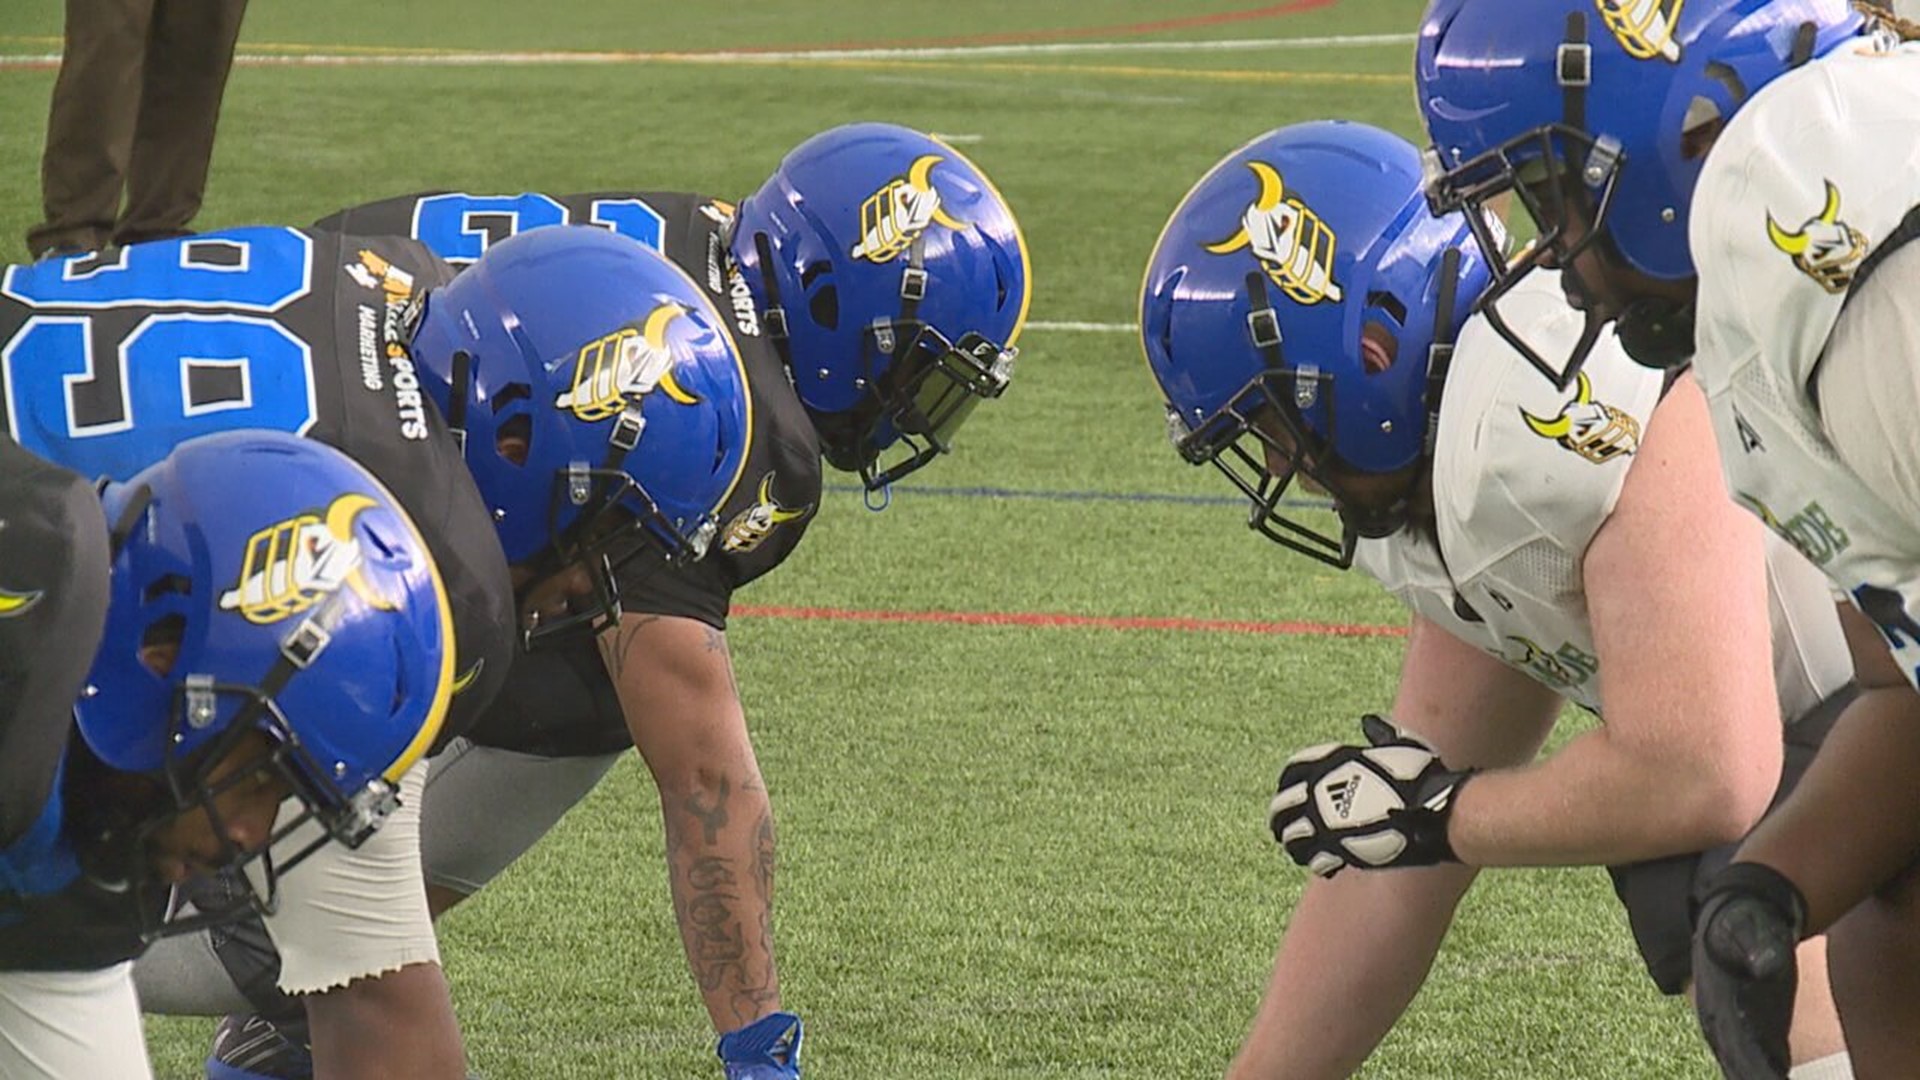 After a decade, the Harrisburg Stampede are back and opening their season Saturday evening.